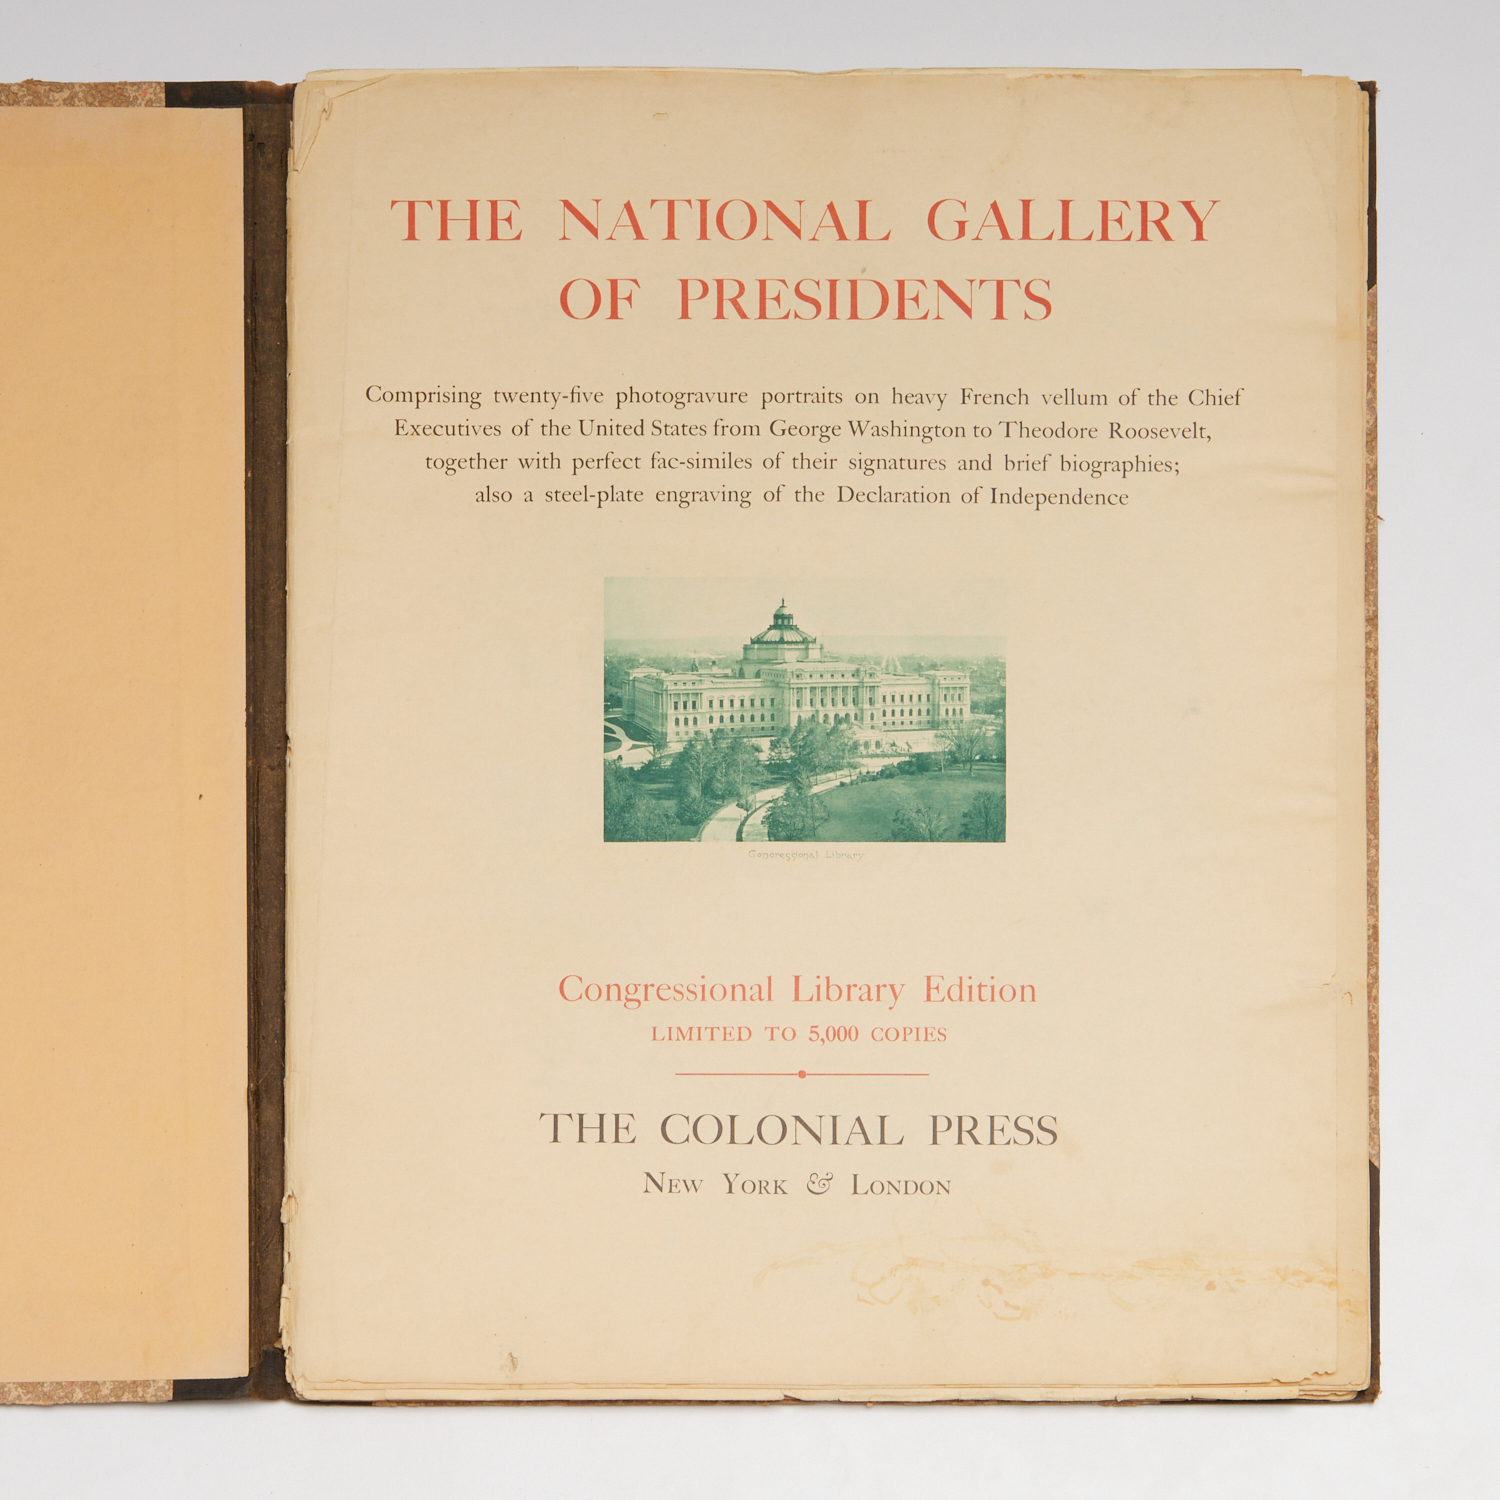 NATIONAL GALLERY OF PRESIDENTS  30be3c